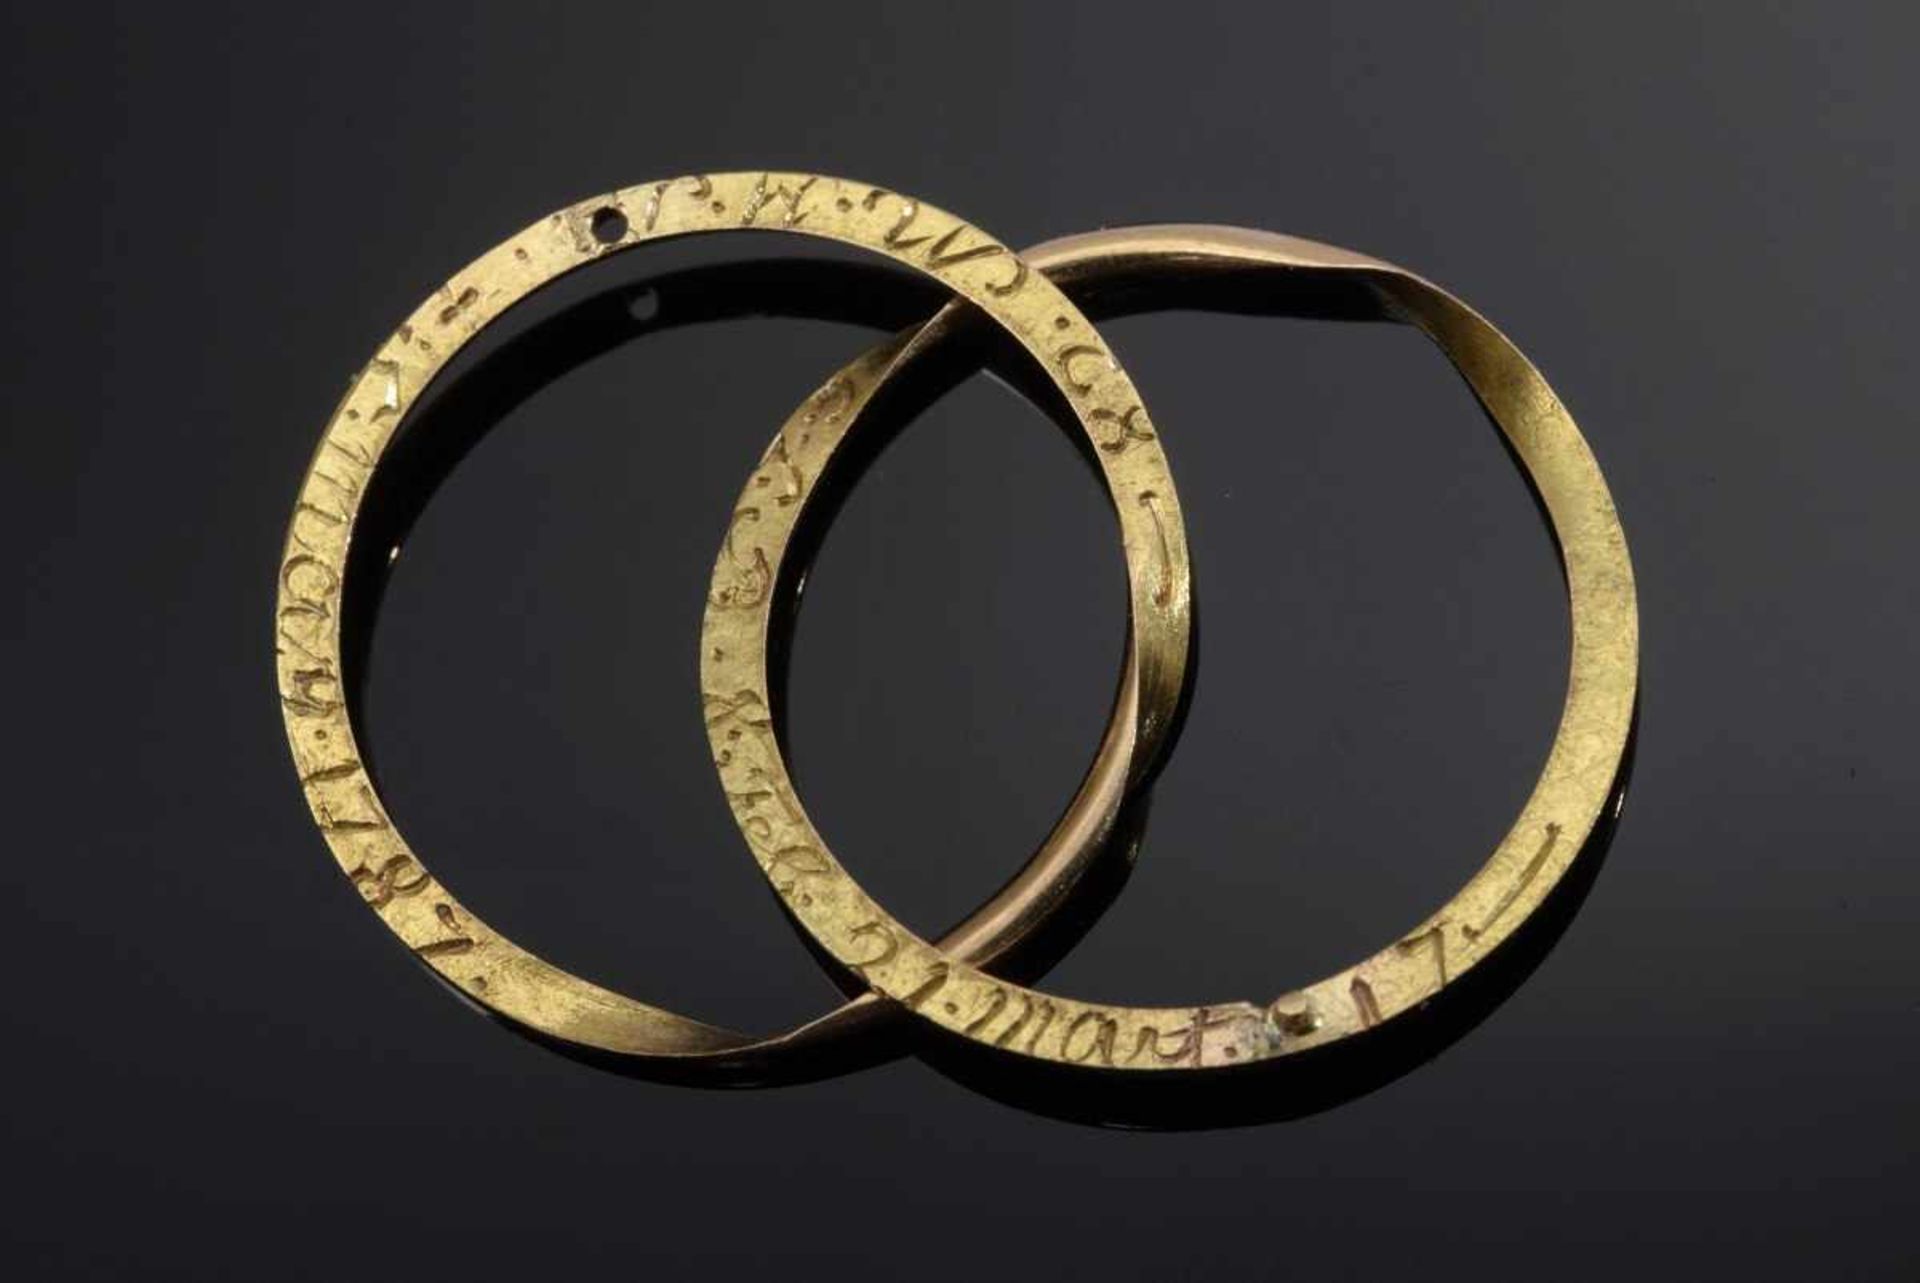 Museum twin/interlocking ring made of 2 hoops, which together form a ring rail, inside memorial - Bild 2 aus 2